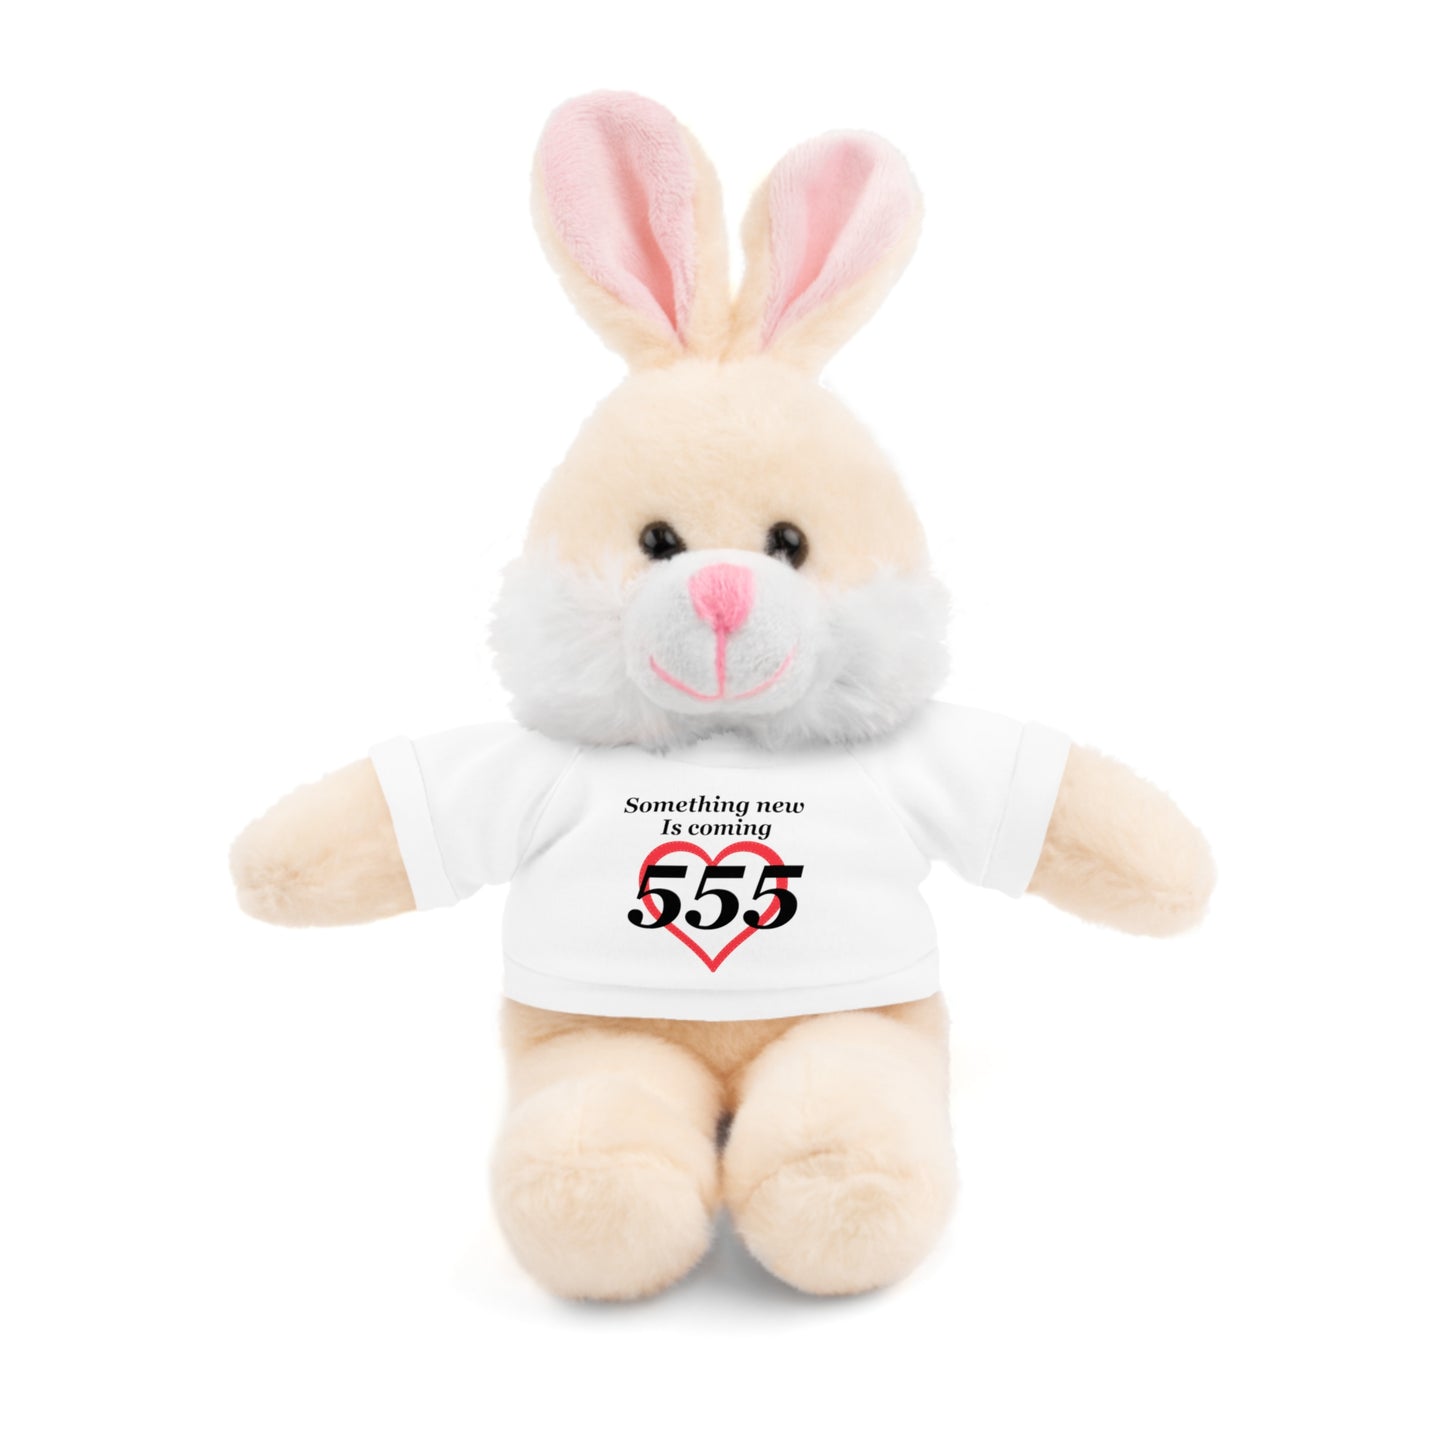 Stuffed Animals with 555 Angel Number Tee